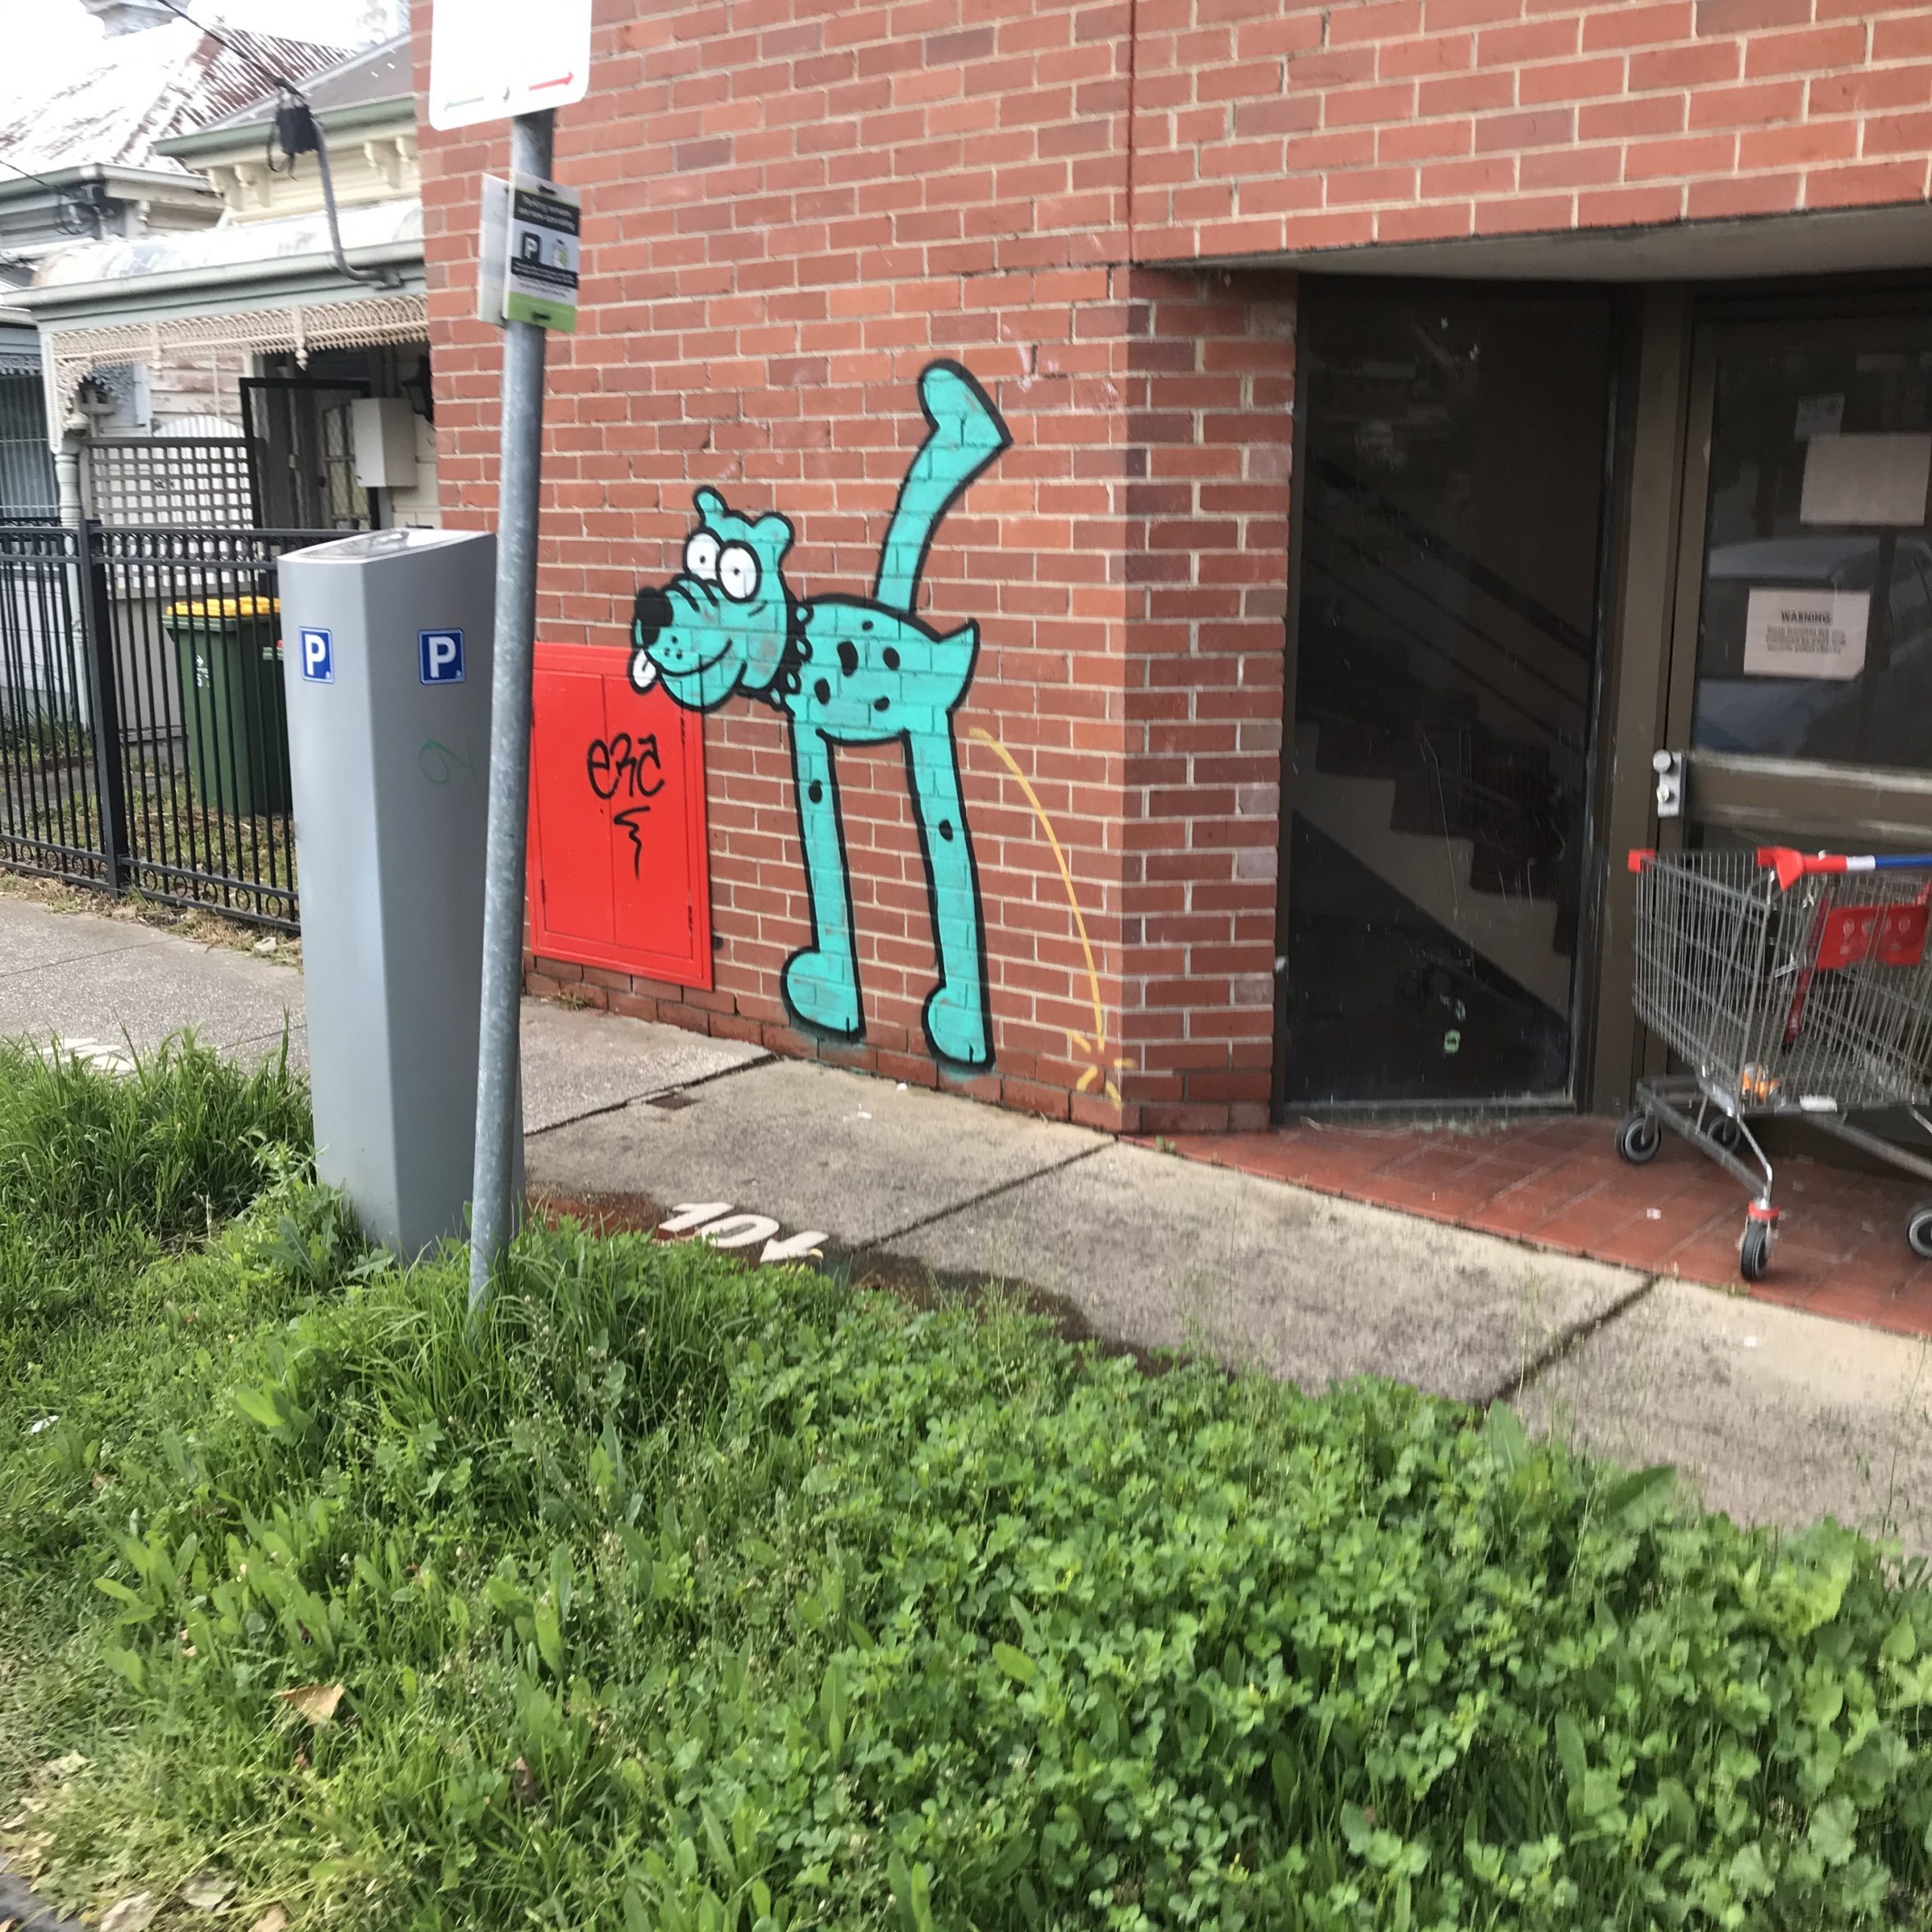 Urinating dog graffitied on a red brick wall and fire hydrant